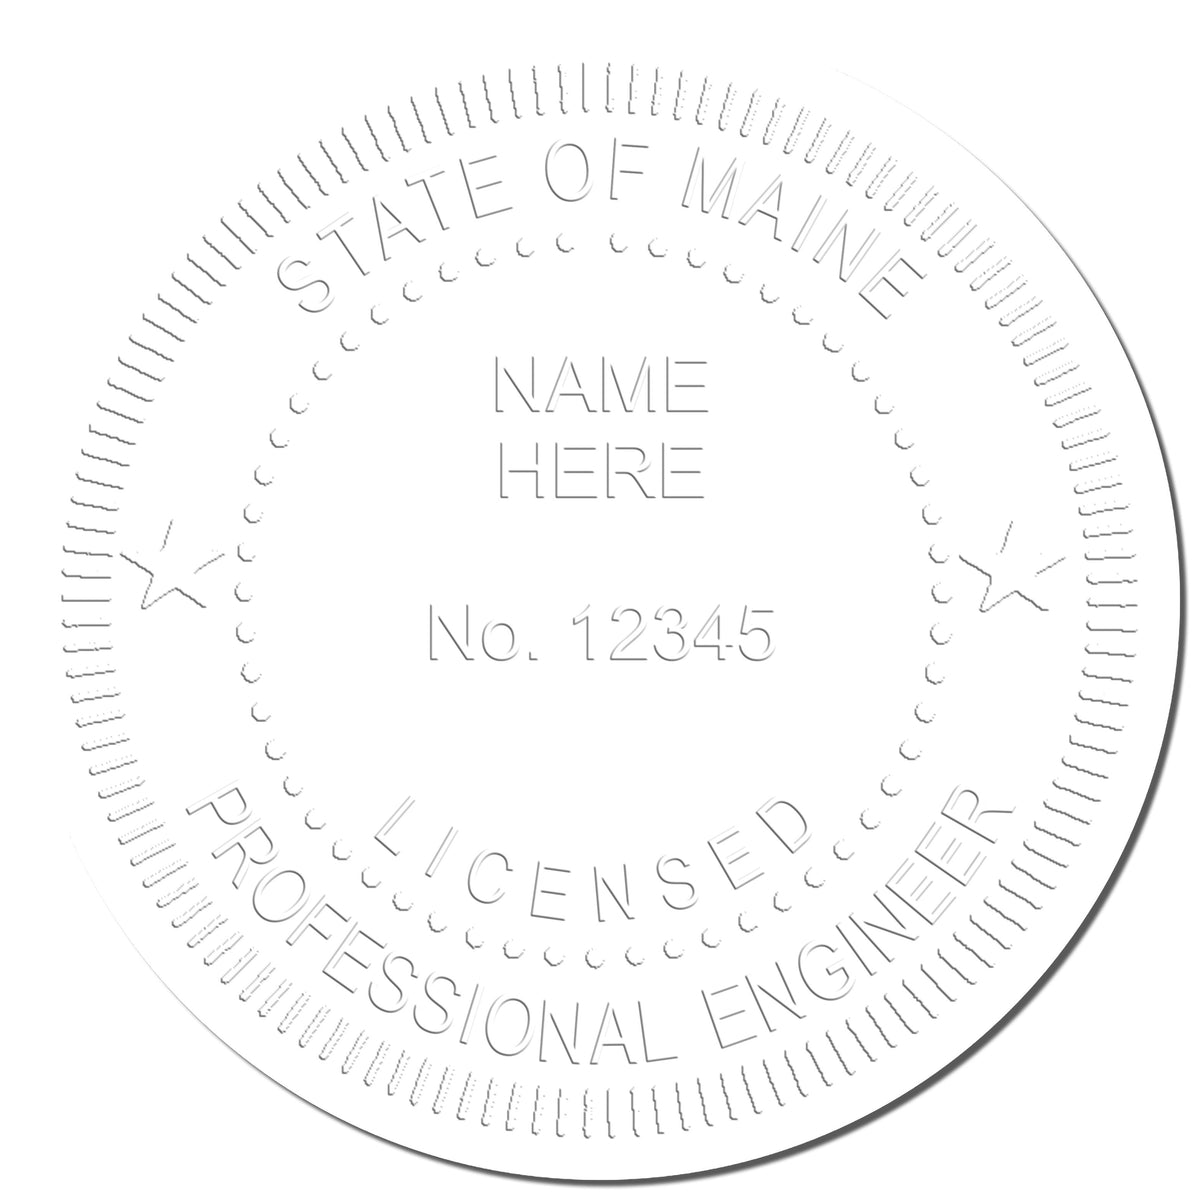 The Soft Maine Professional Engineer Seal stamp impression comes to life with a crisp, detailed photo on paper - showcasing true professional quality.